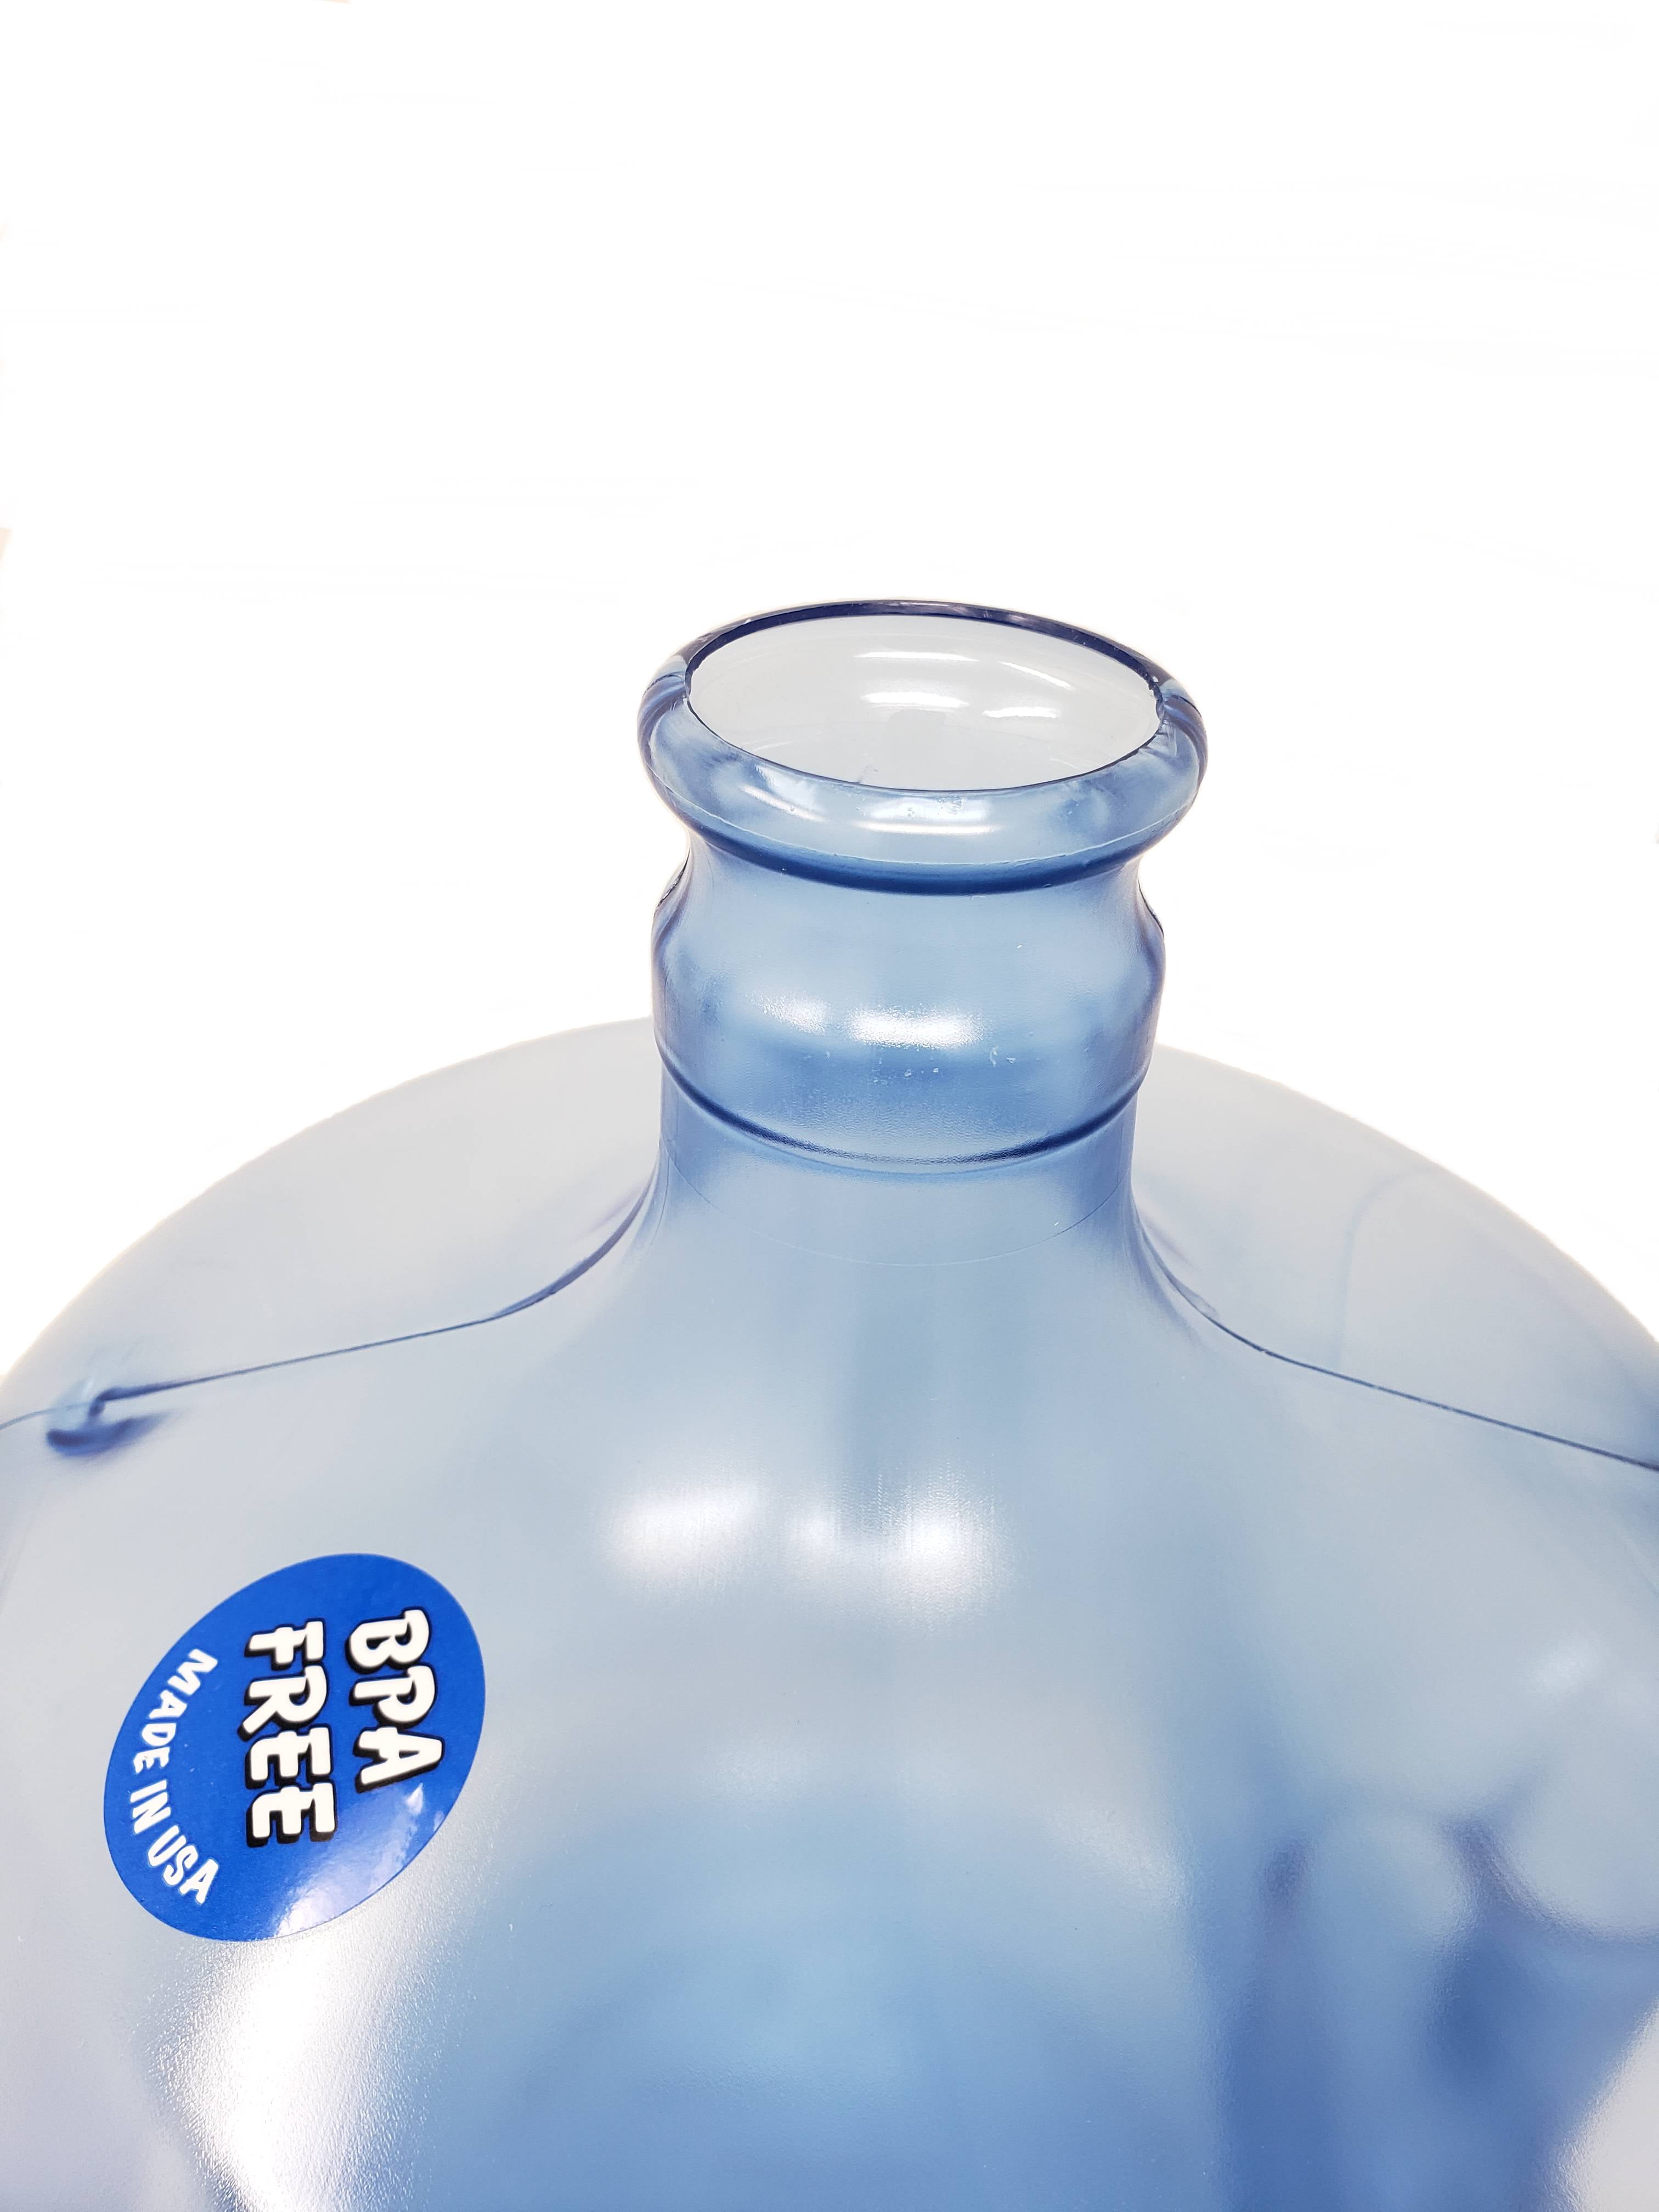 H8O Polycarbonate 3 gallon Tall Water Bottle (with Handle) with 48mm Cap